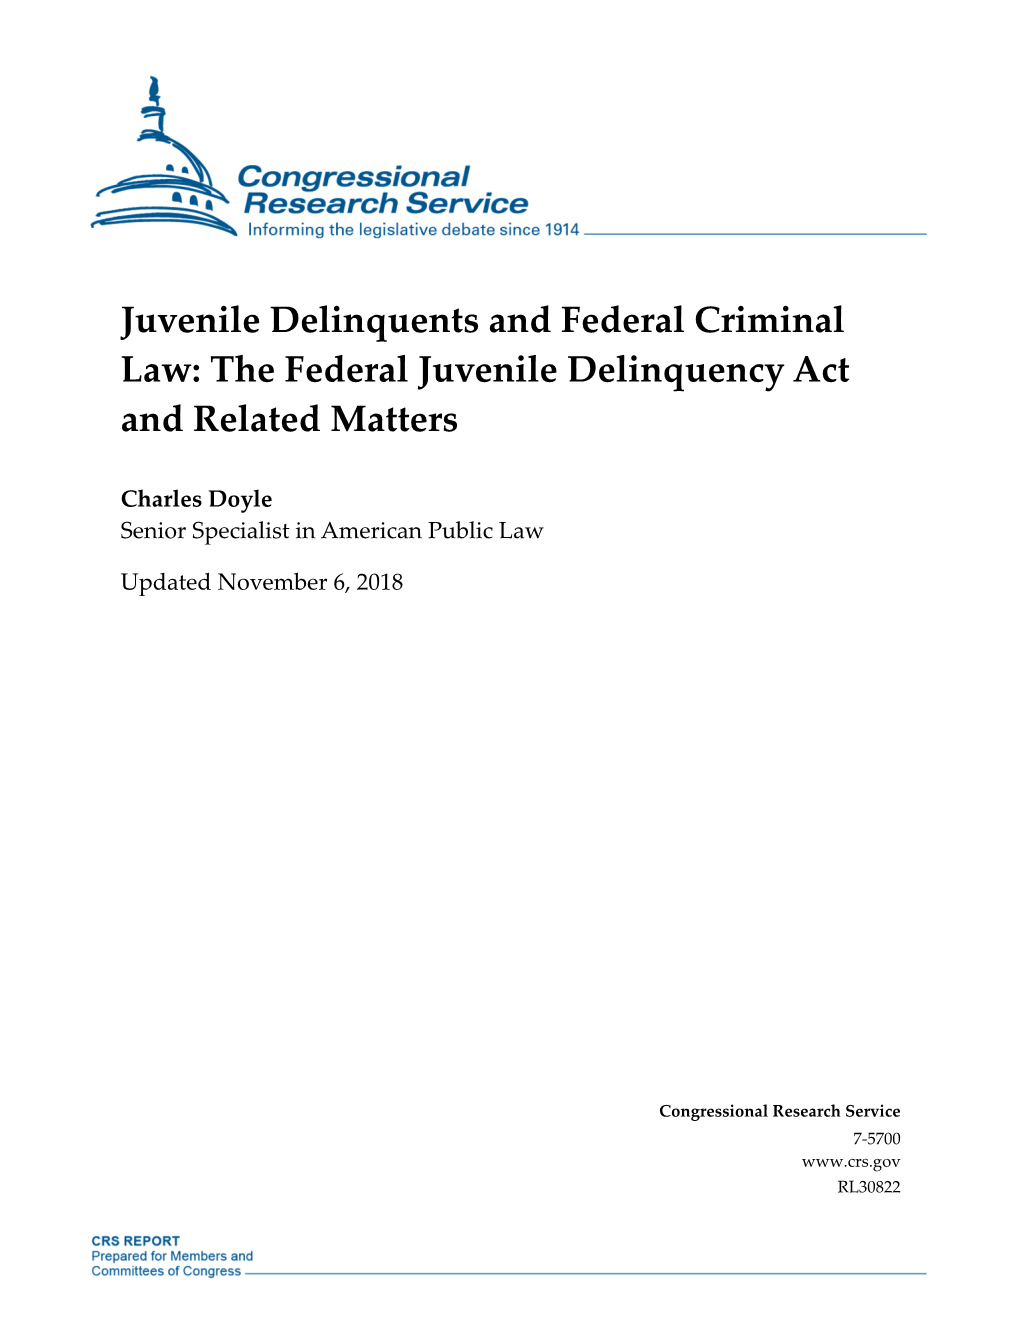 The Federal Juvenile Delinquency Act and Related Matters